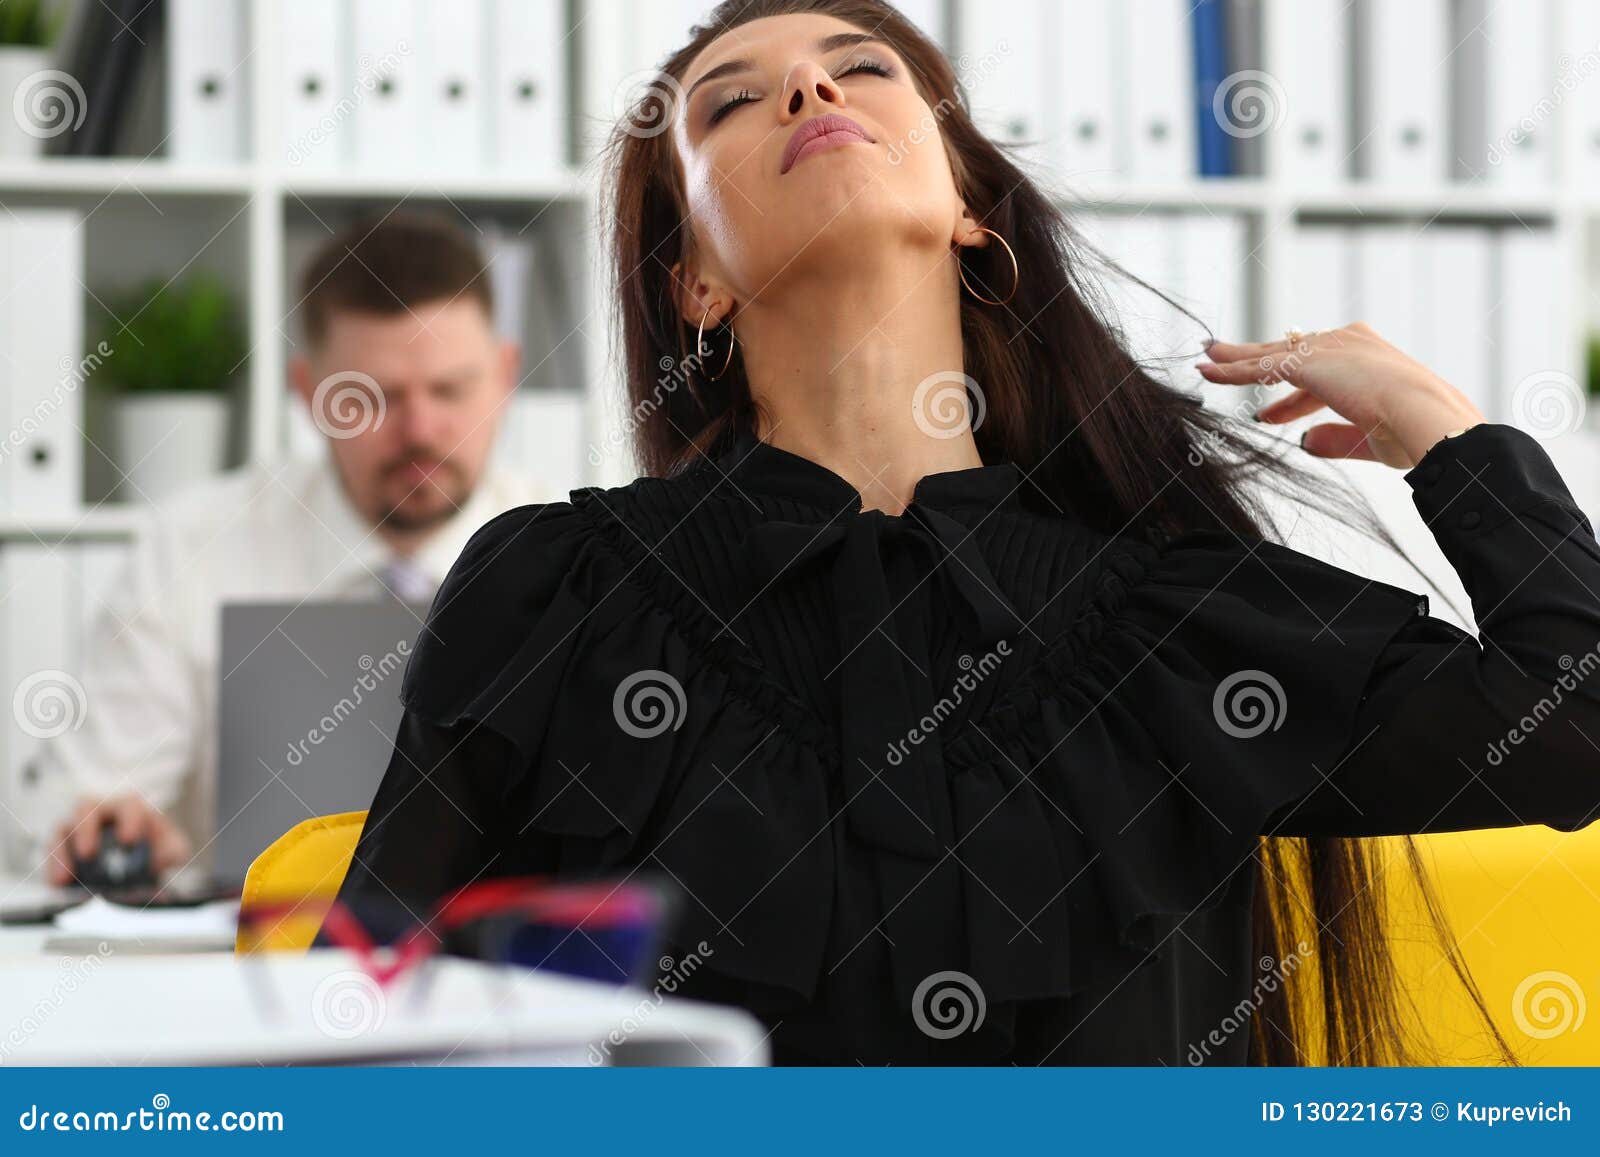 Beautiful Smiling Brunette Woman In Office Tidying Hair Stock Image Image Of Clerk Assistant